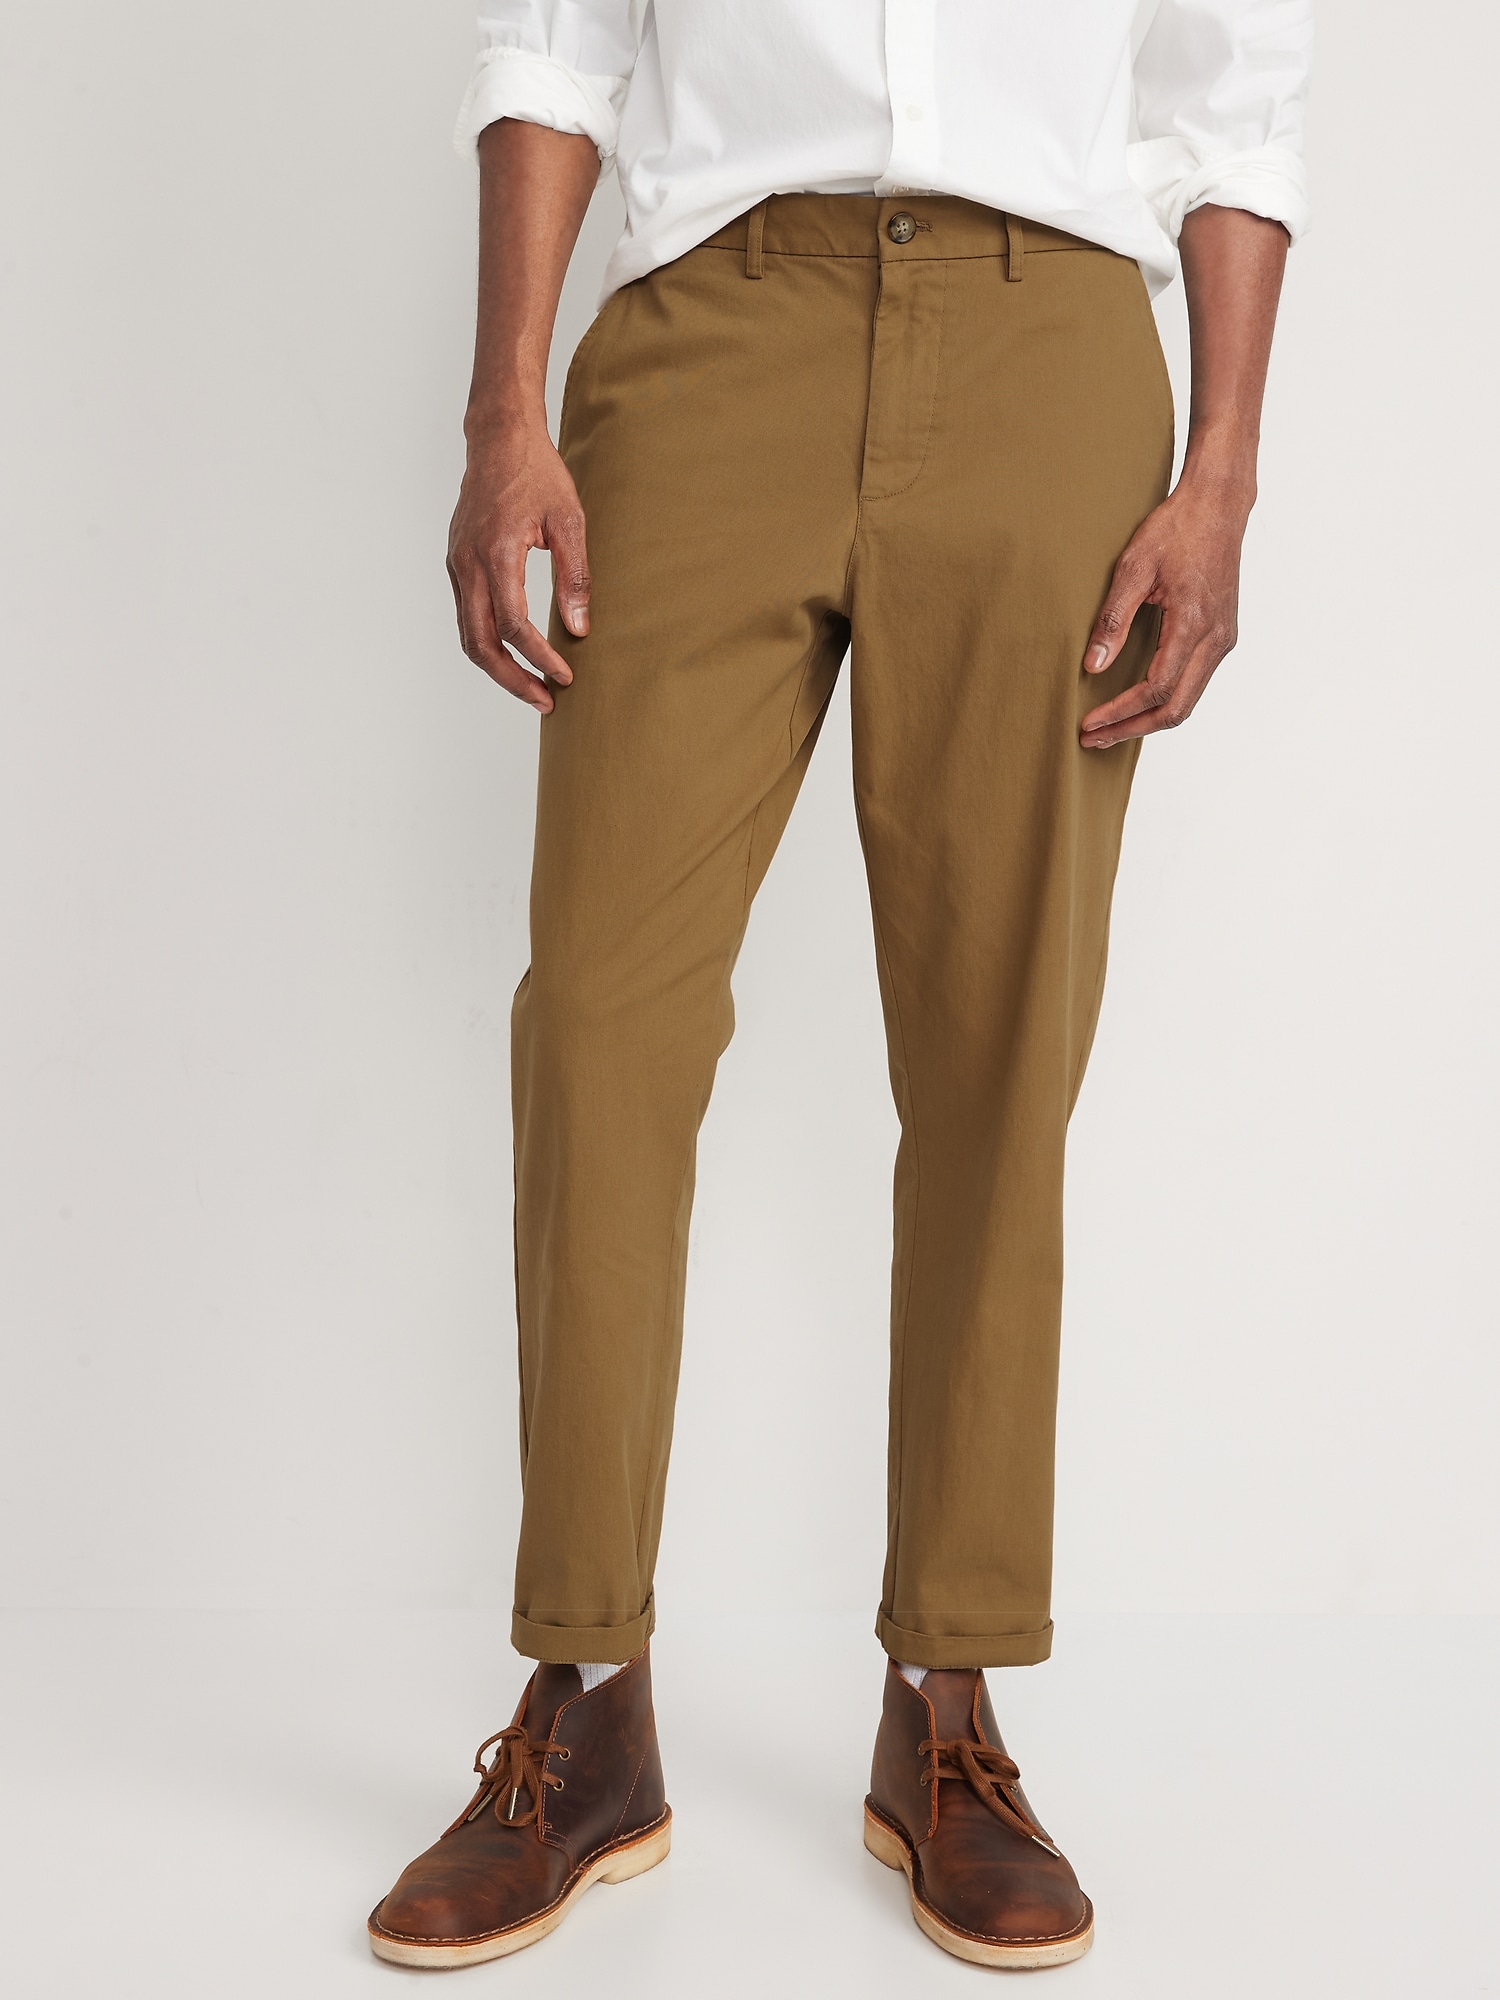 Loose Taper Built-In Flex Rotation Ankle-Length Chino Pants